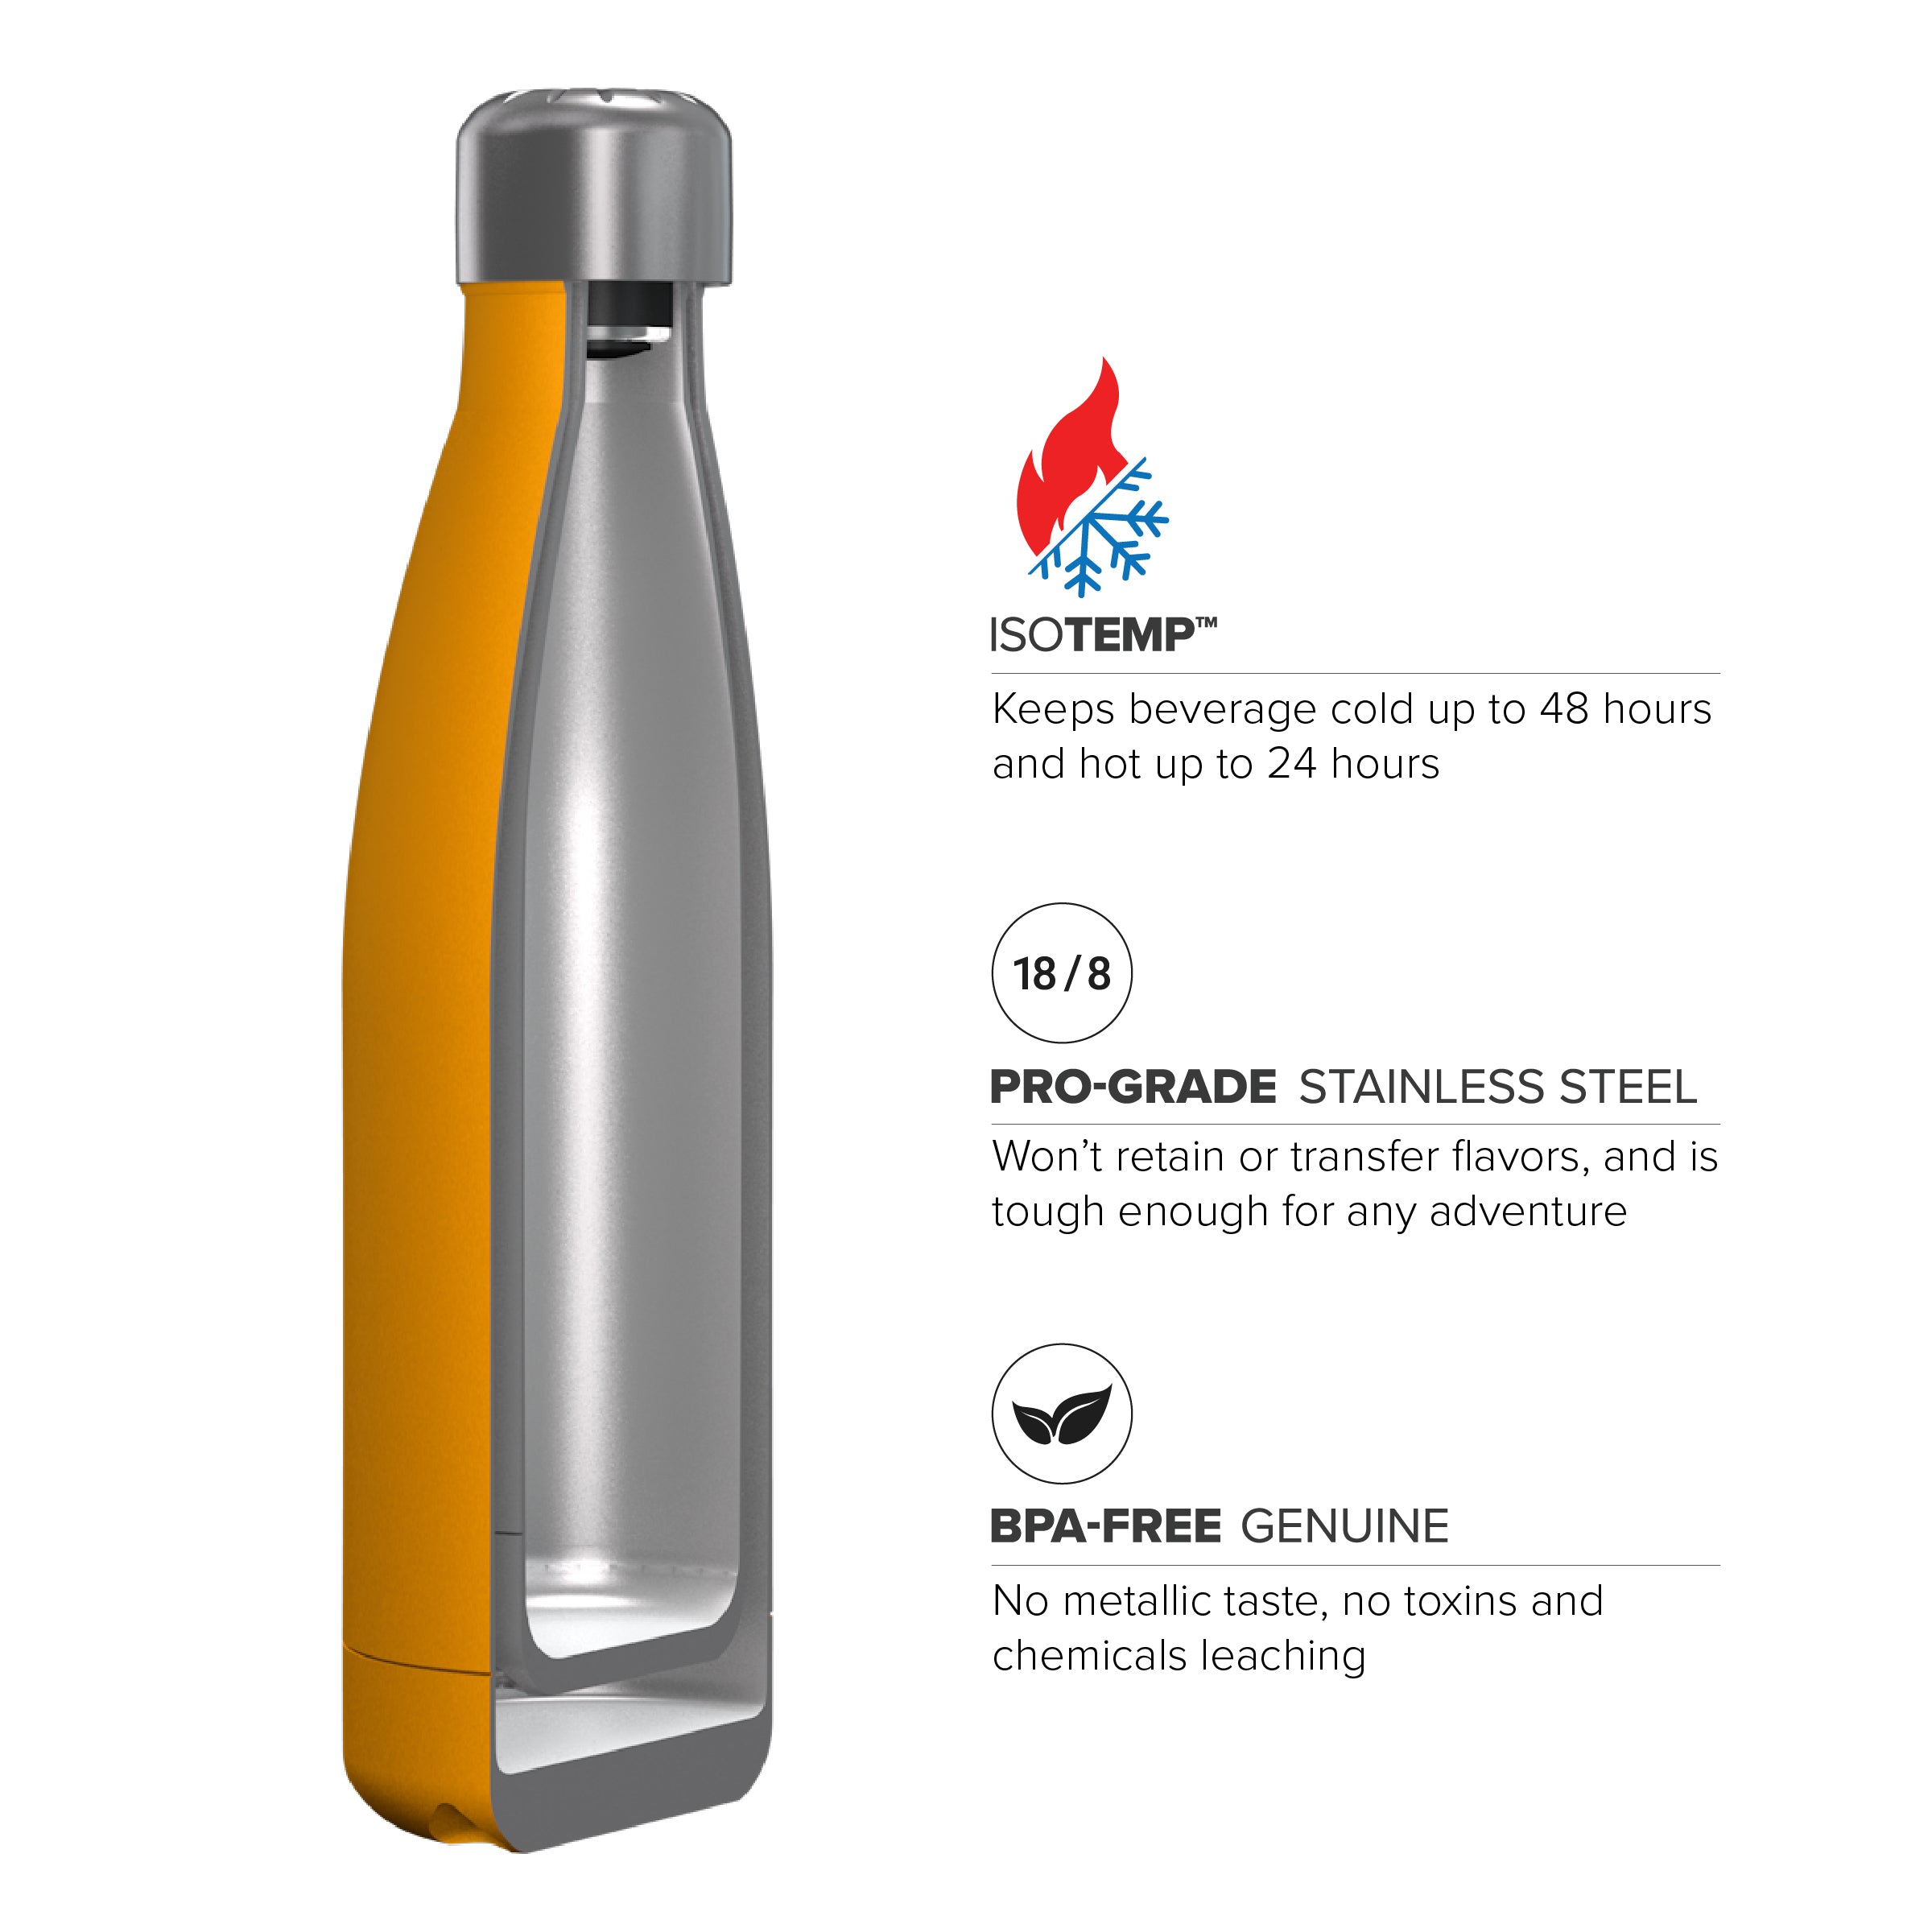 Geo Double Wall Vacuum Insulated Stainless Steel Water Bottle